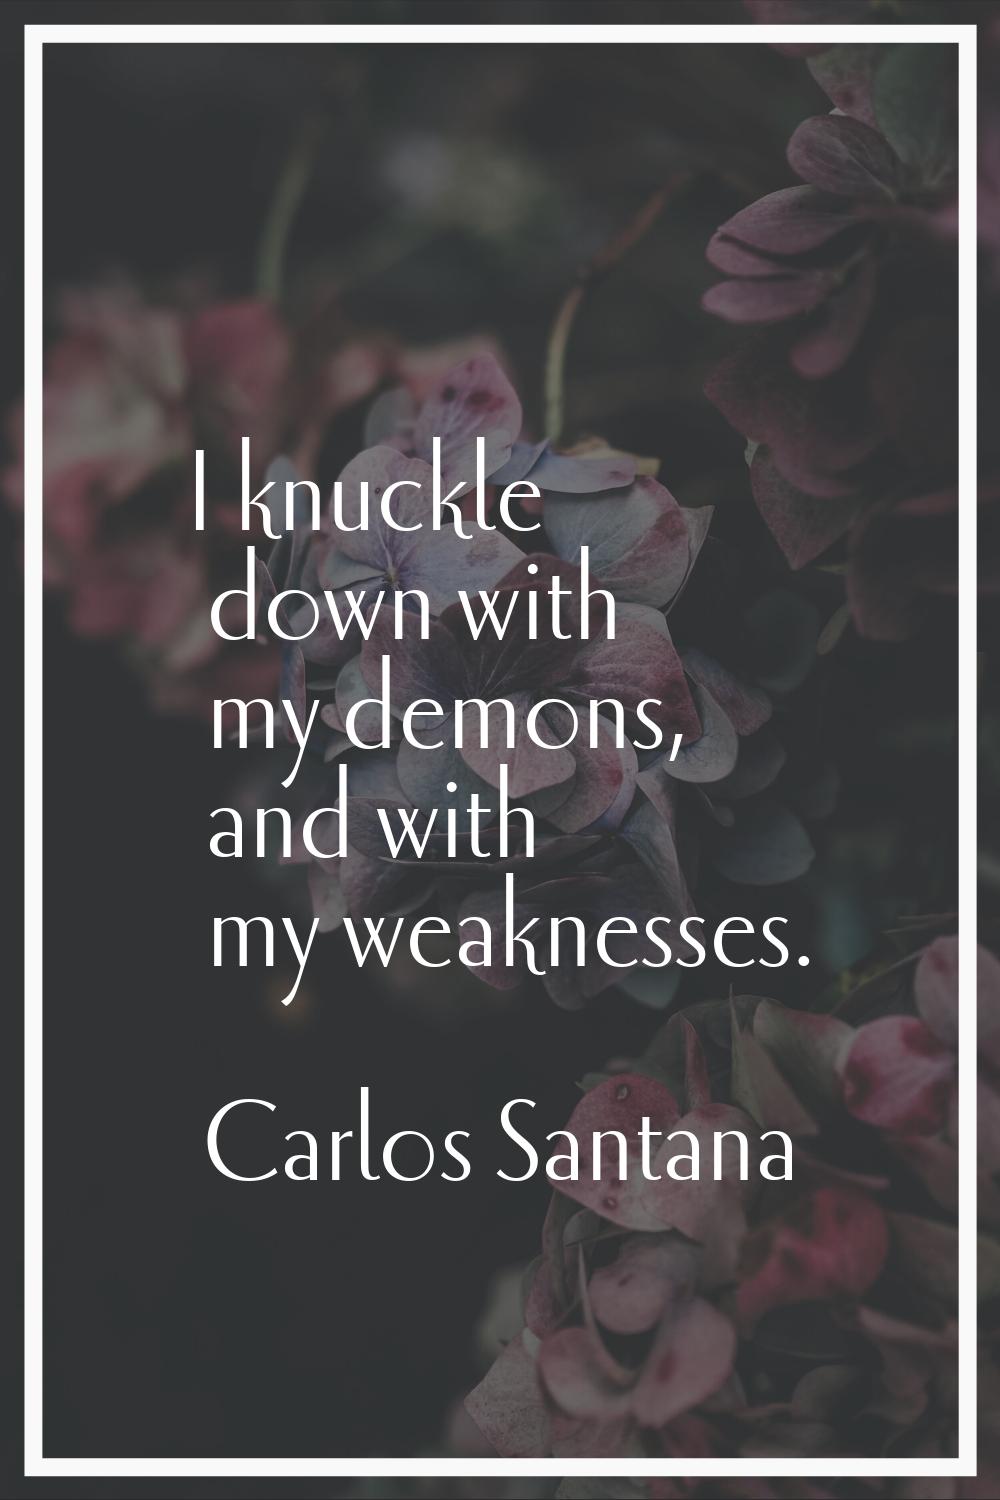 I knuckle down with my demons, and with my weaknesses.